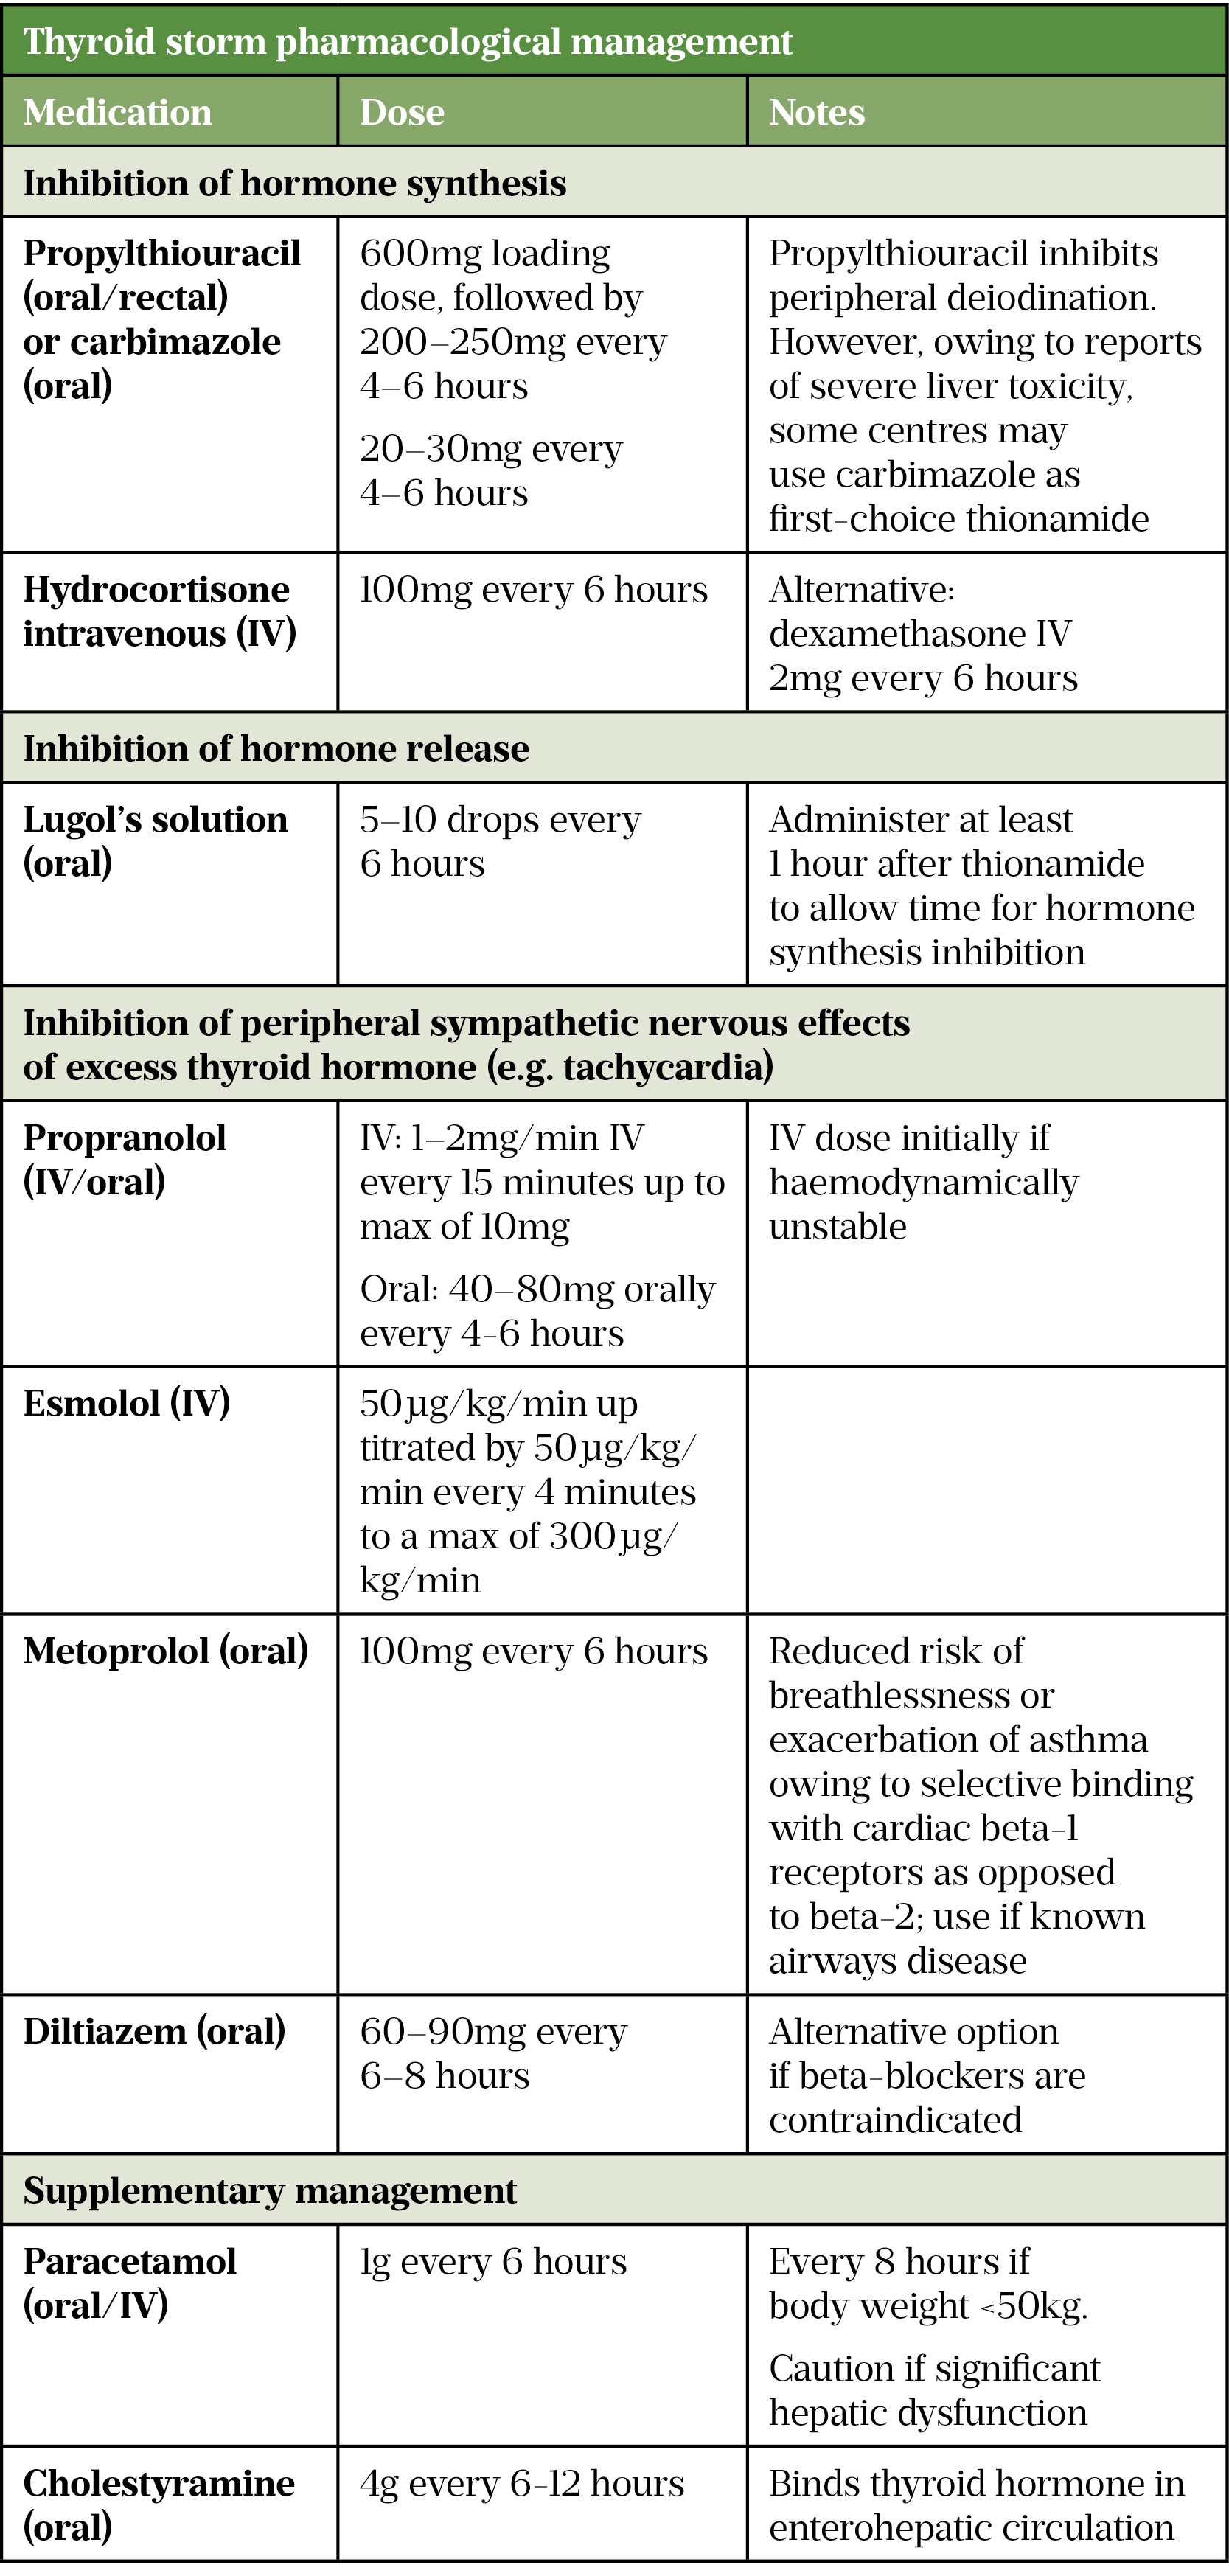 Table 4: Thyroid storm pharmacological management